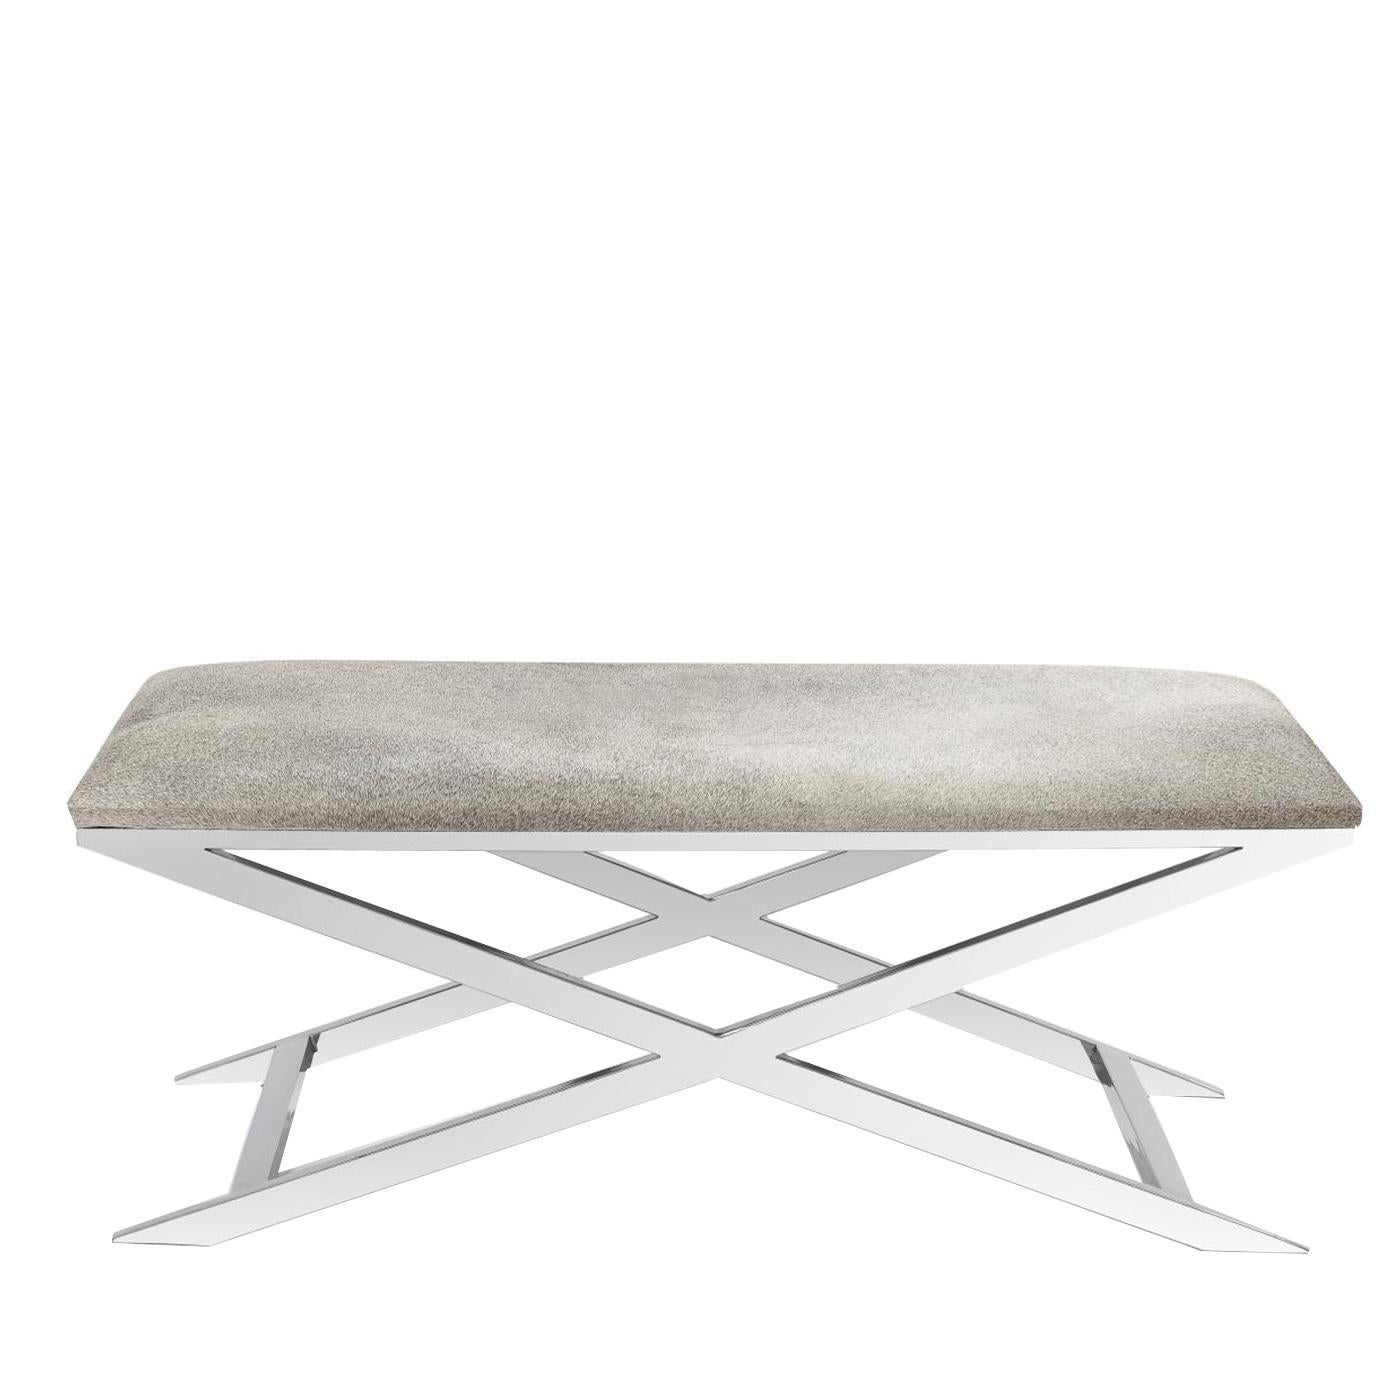 This extremely elegant, thoroughly modern ottoman features a light gray seat and silver chrome frame, for a minimalistic, ethereal look. The diagonal lines of its base add energy and movement to the solid, minimalistic restraint of its cover. Its